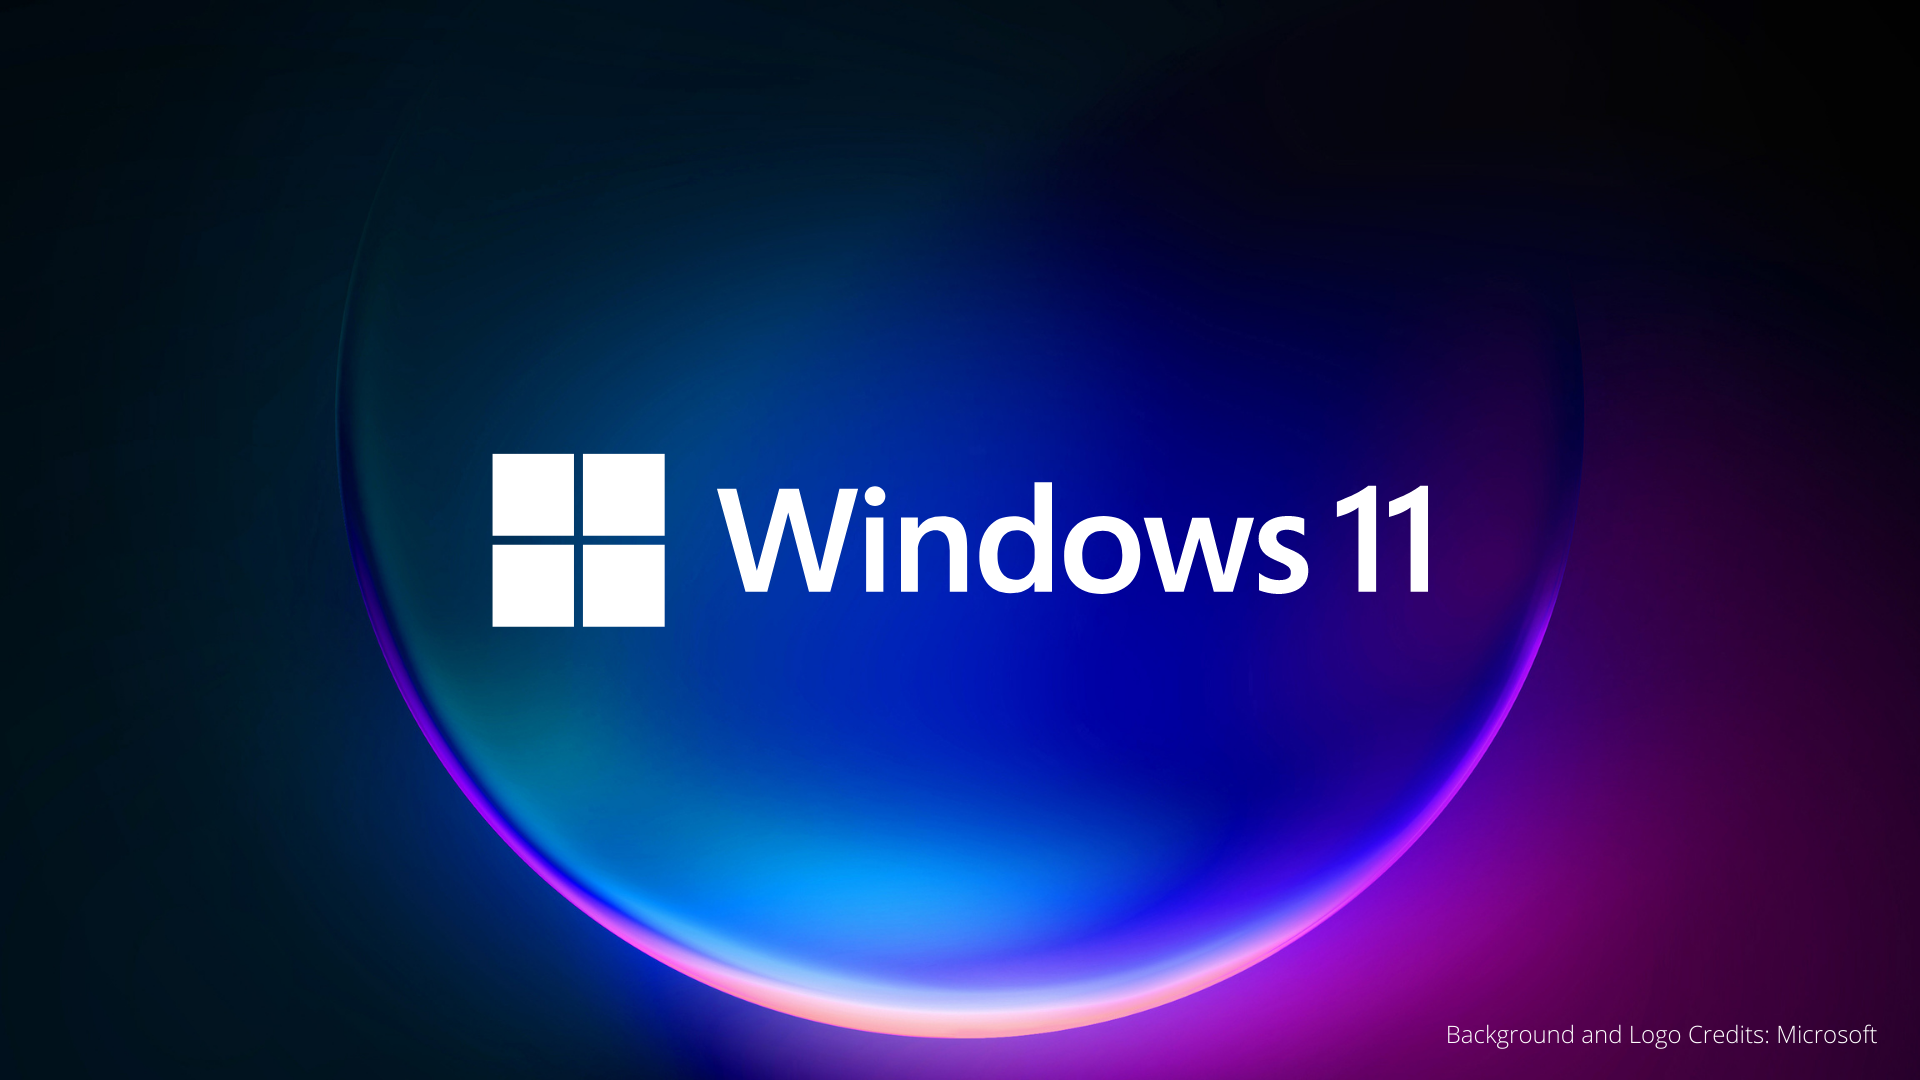 Microsoft has released a new Windows 11 Validation OS!